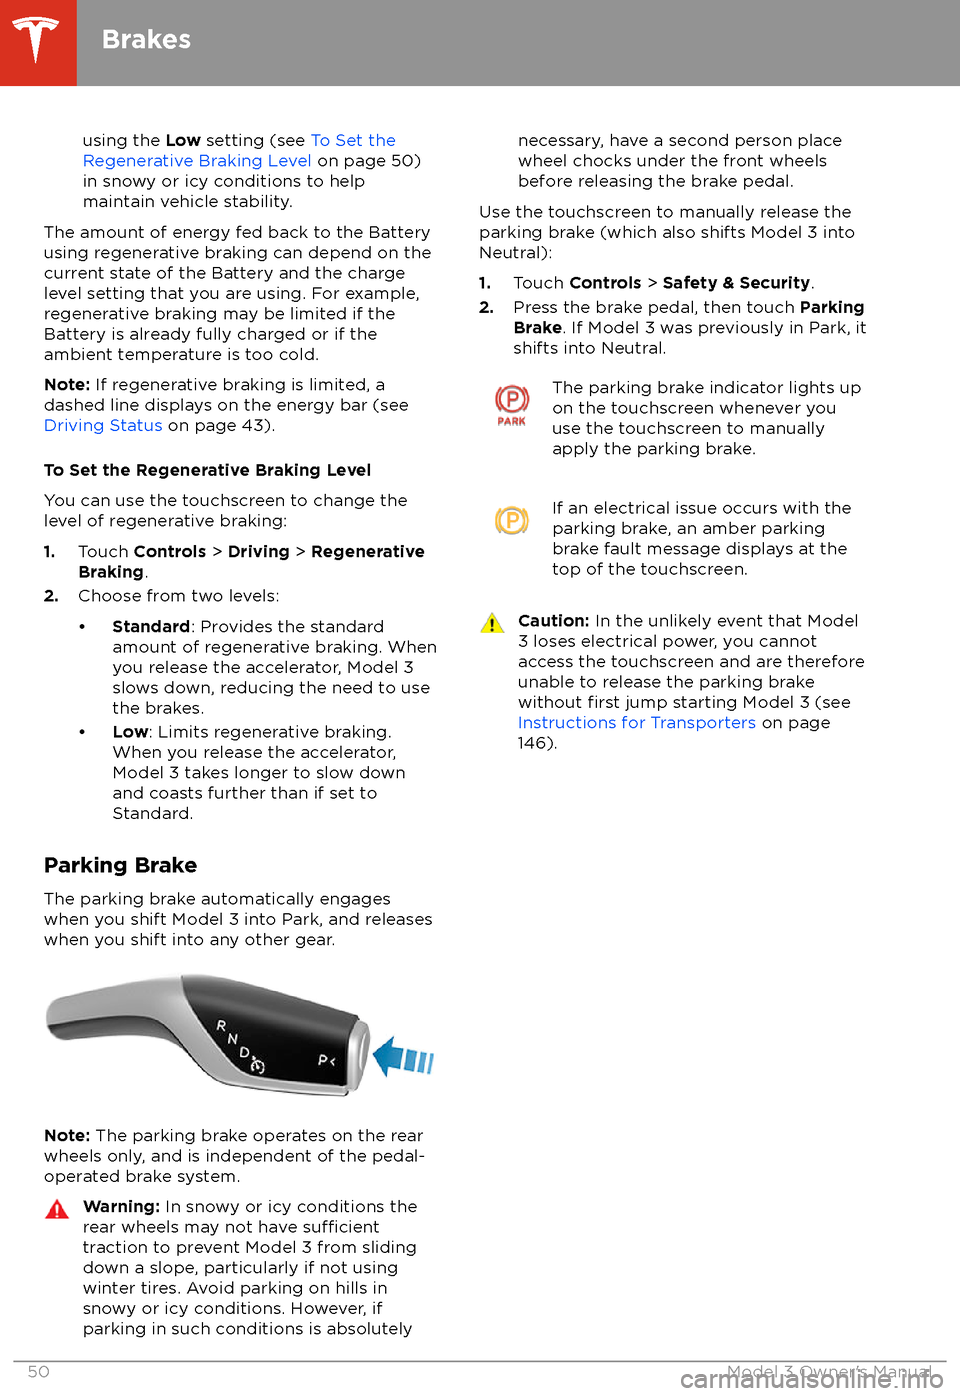 TESLA MODEL 3 2018  Owners Manual using the Low setting (see  To Set the
Regenerative Braking Level  on page 50)
in snowy or icy conditions to help
maintain vehicle stability.
The amount of energy fed back to the Battery using regener